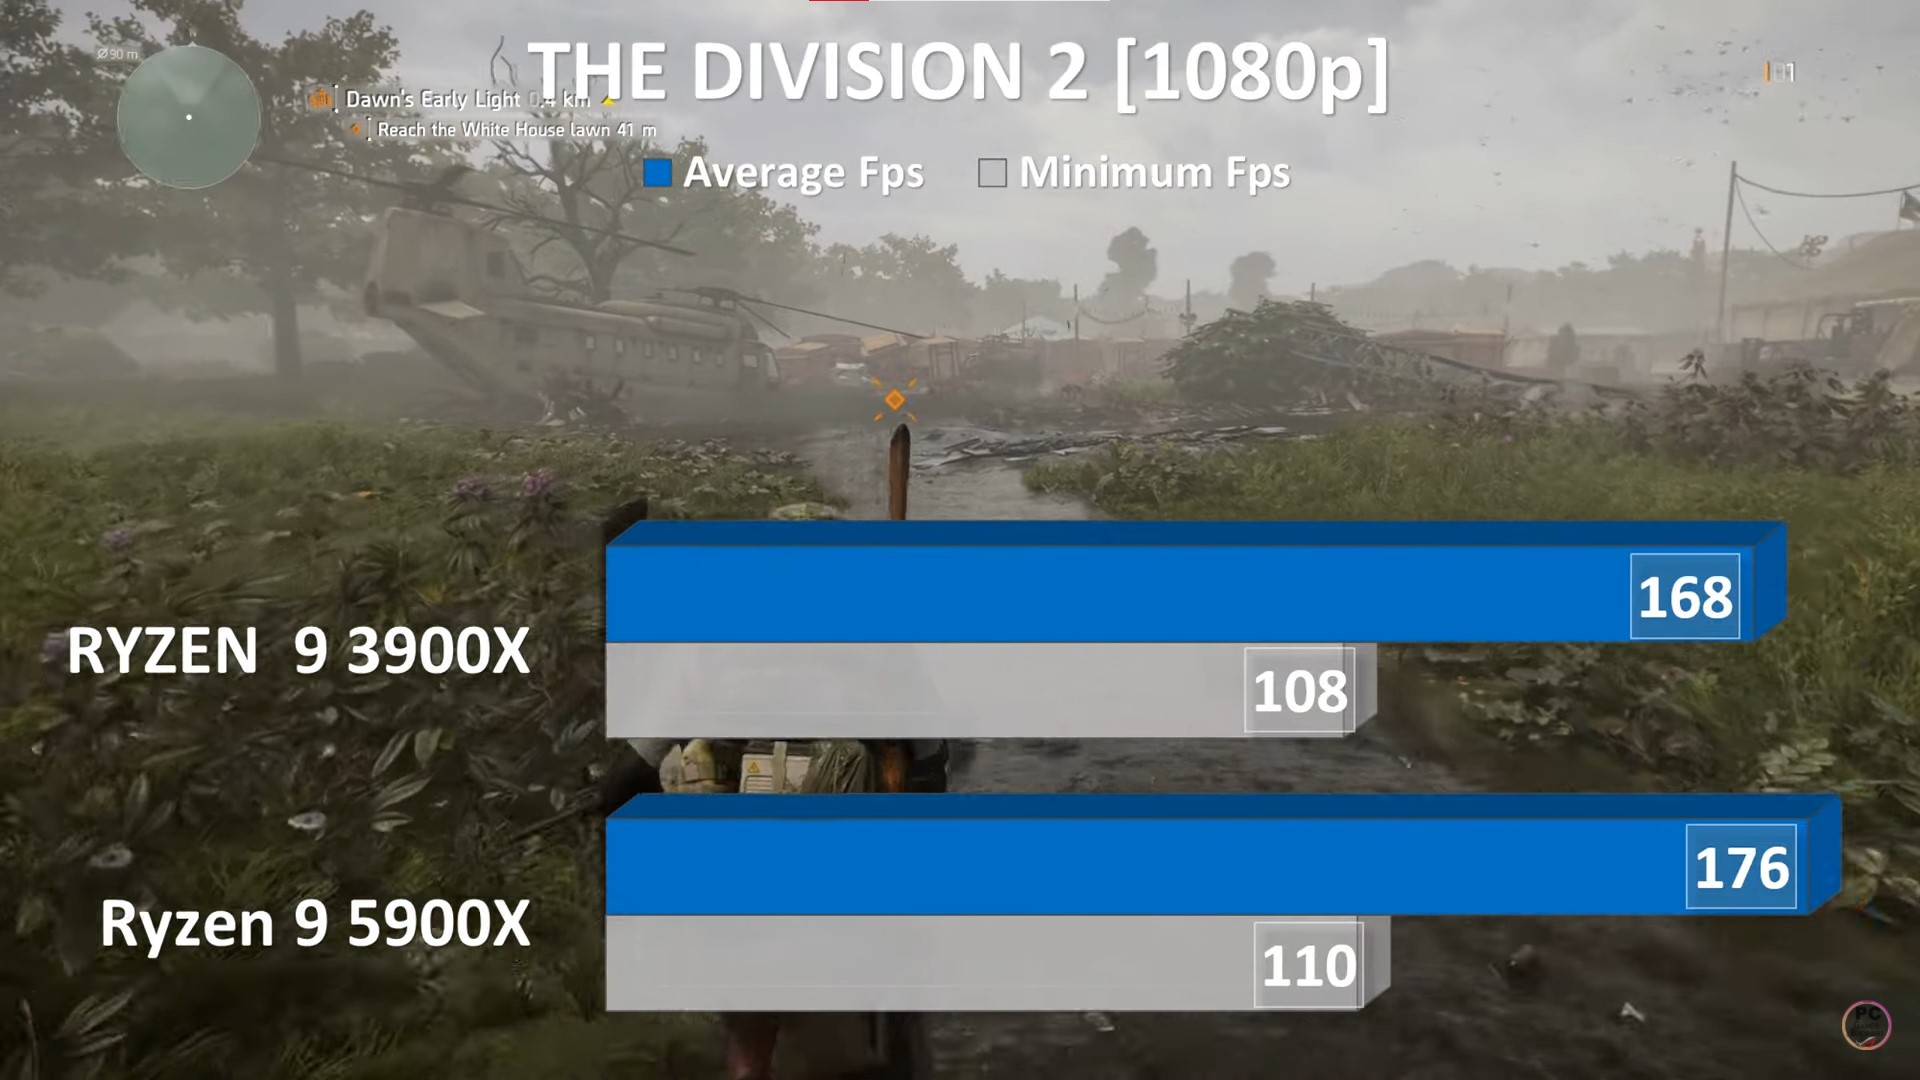 Comparing performance with Tom Clancy's Division 2.